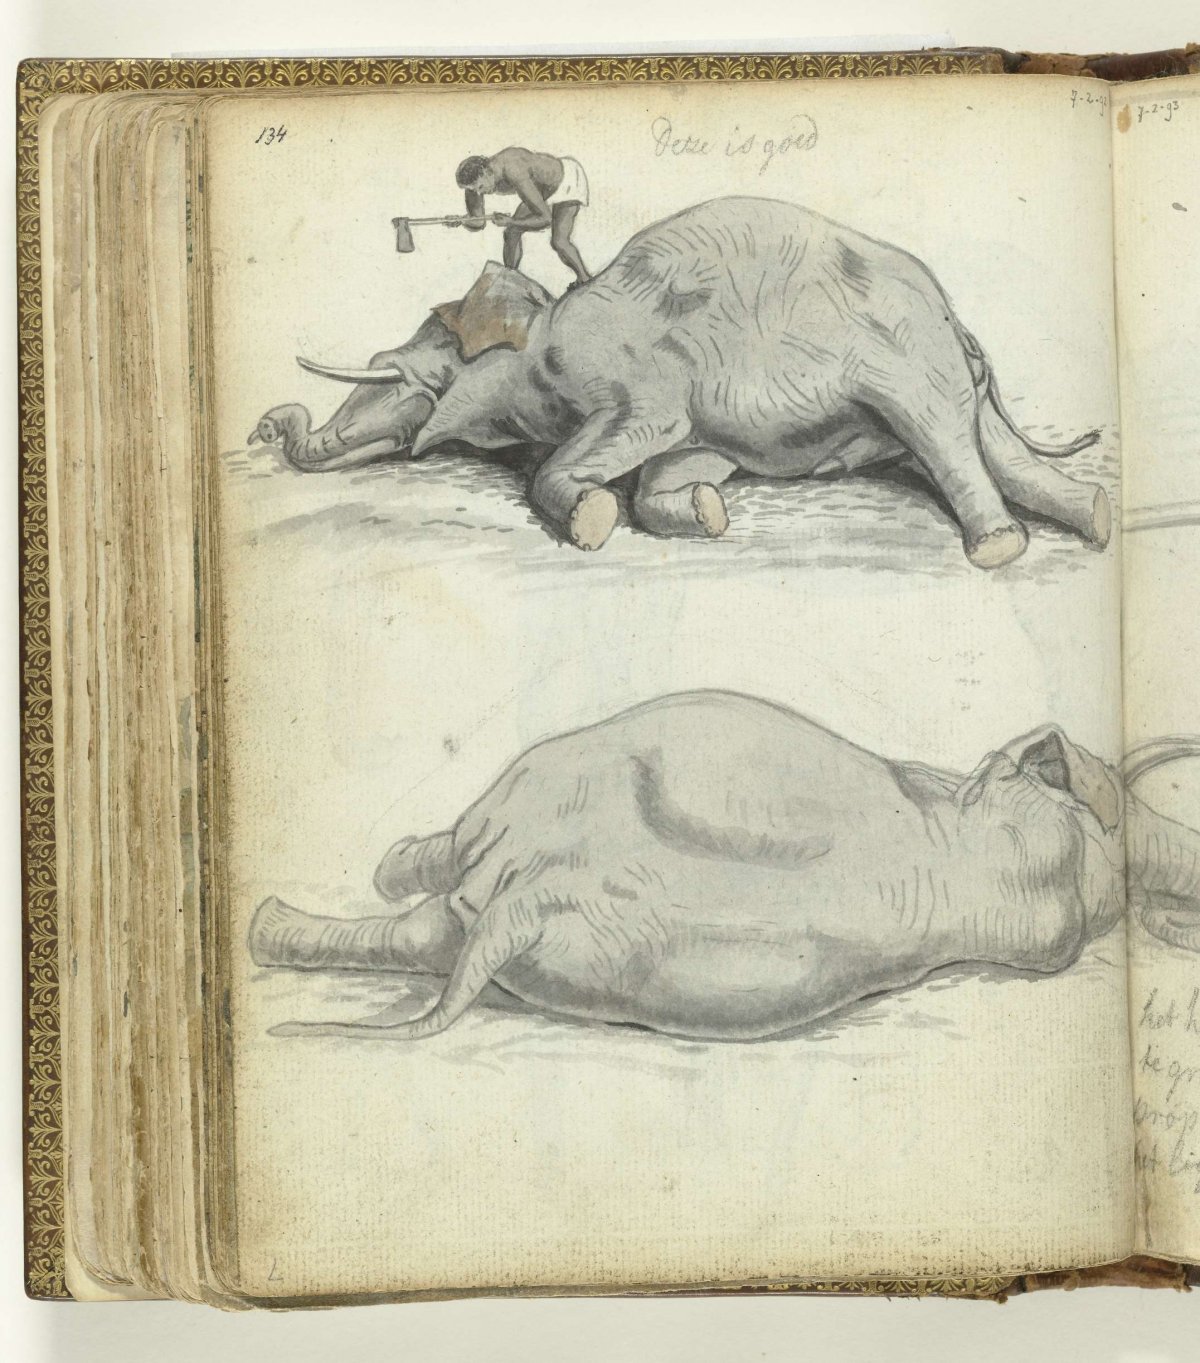 Reclining elephant with chopping Sinhalese, Jan Brandes, 1785